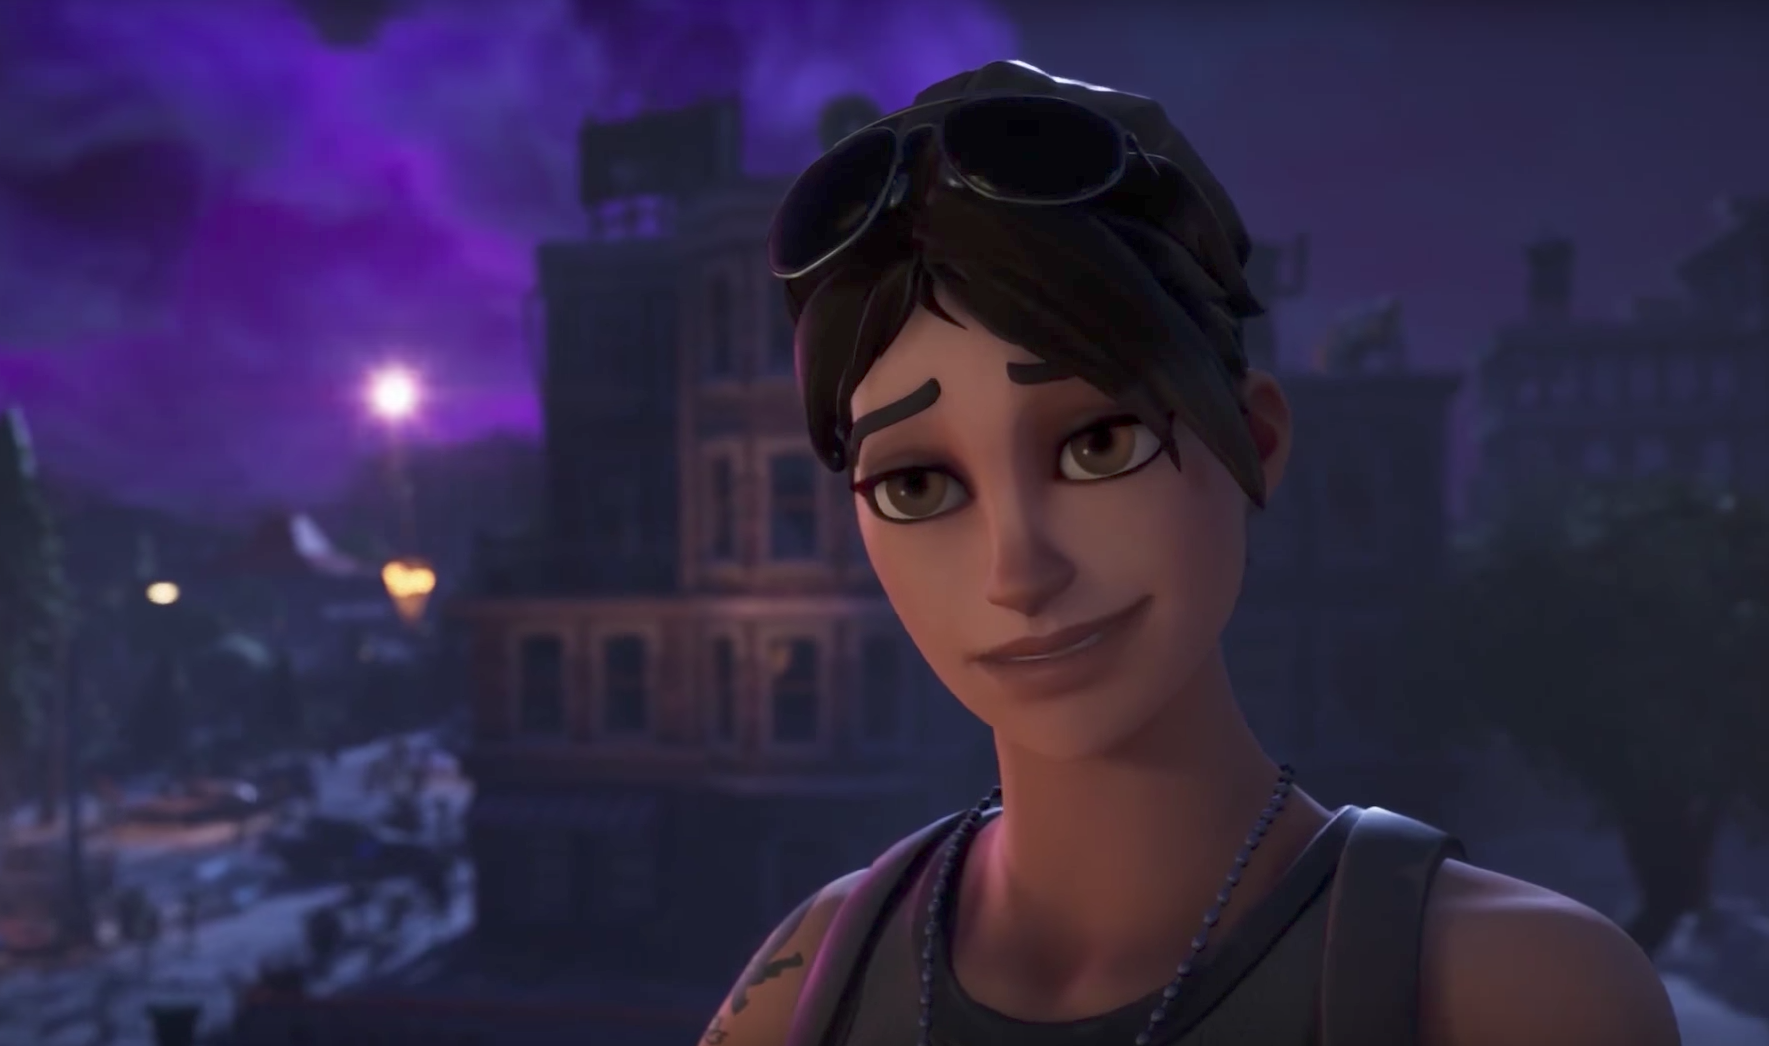 Epic Is Suing Two Alleged Fortnite Cheaters | Kotaku Australia - 1769 x 1046 png 1177kB